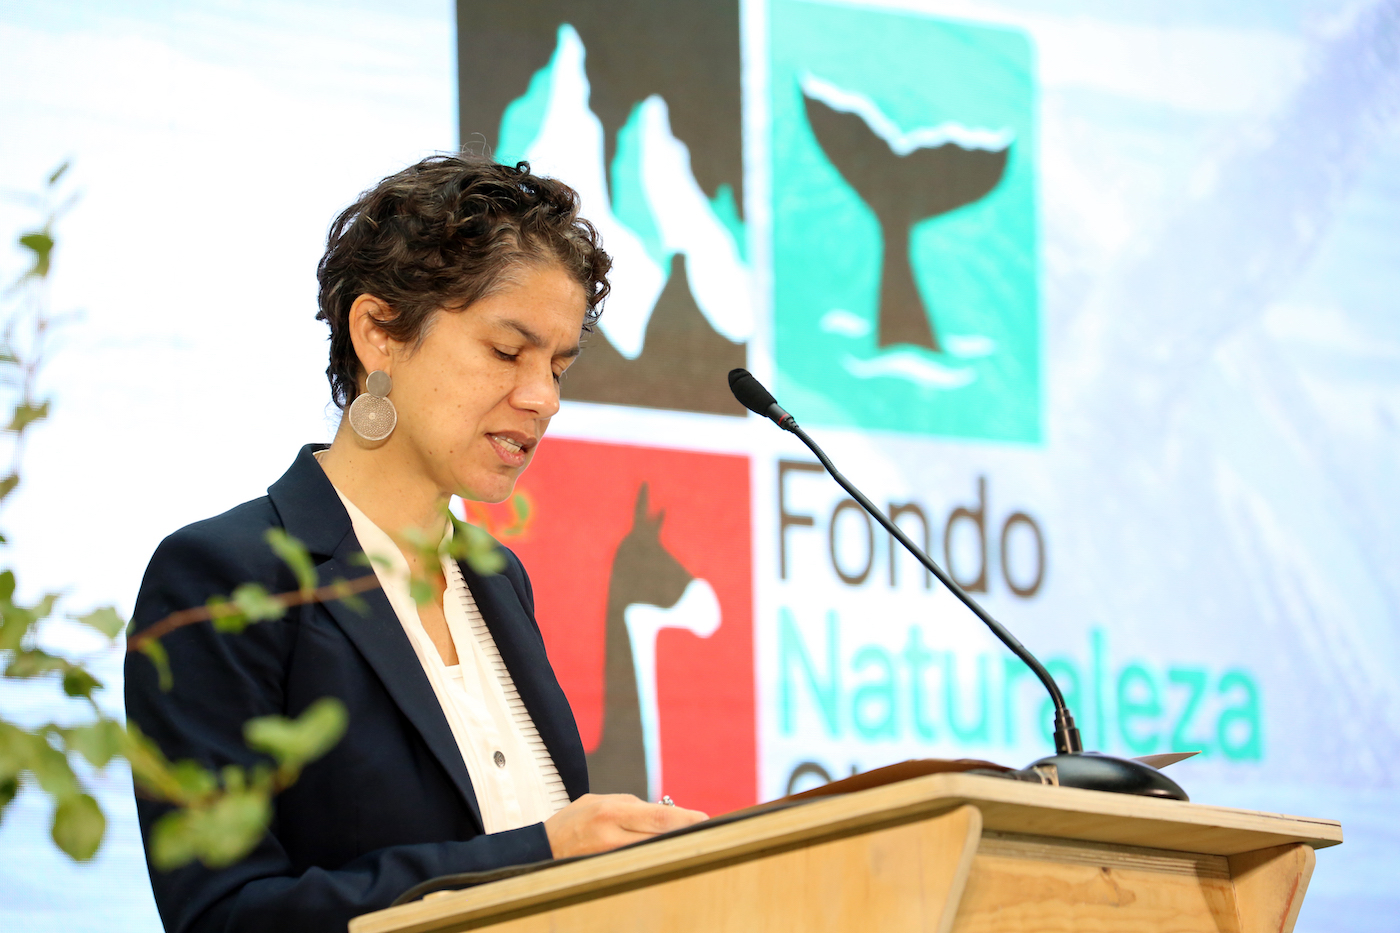 Chile’s environmment minister, Maisa Rojas, speaking at the launch event on April 4 in Santiago. Photo: Fondo Naturaleza